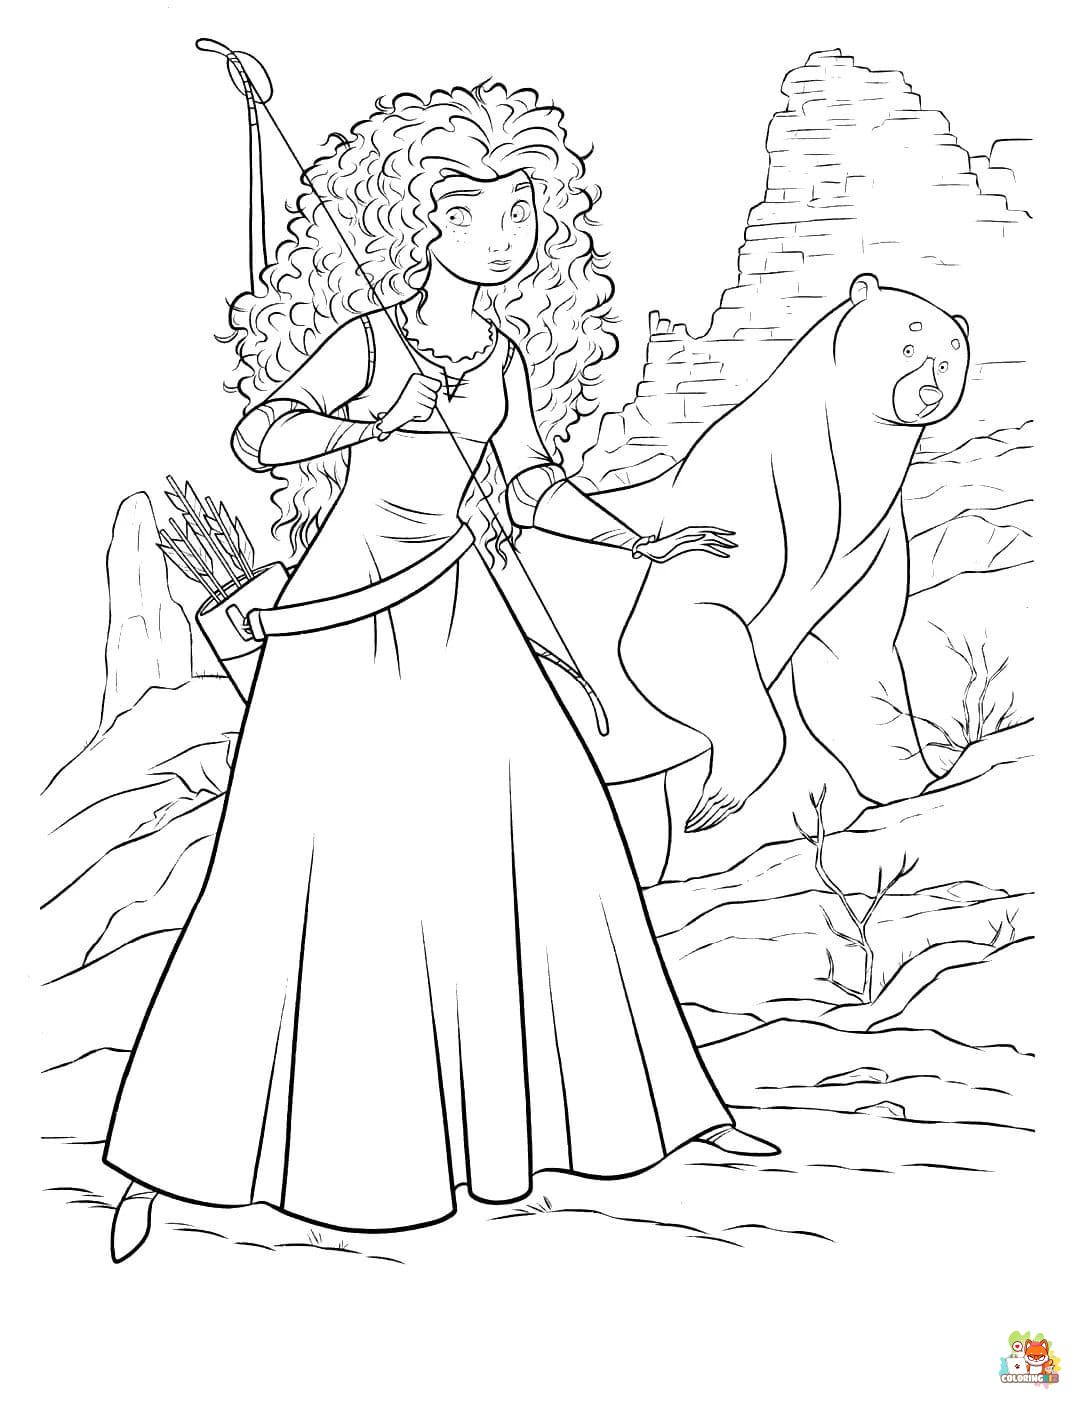 Merida Archery Coloring Pages 7